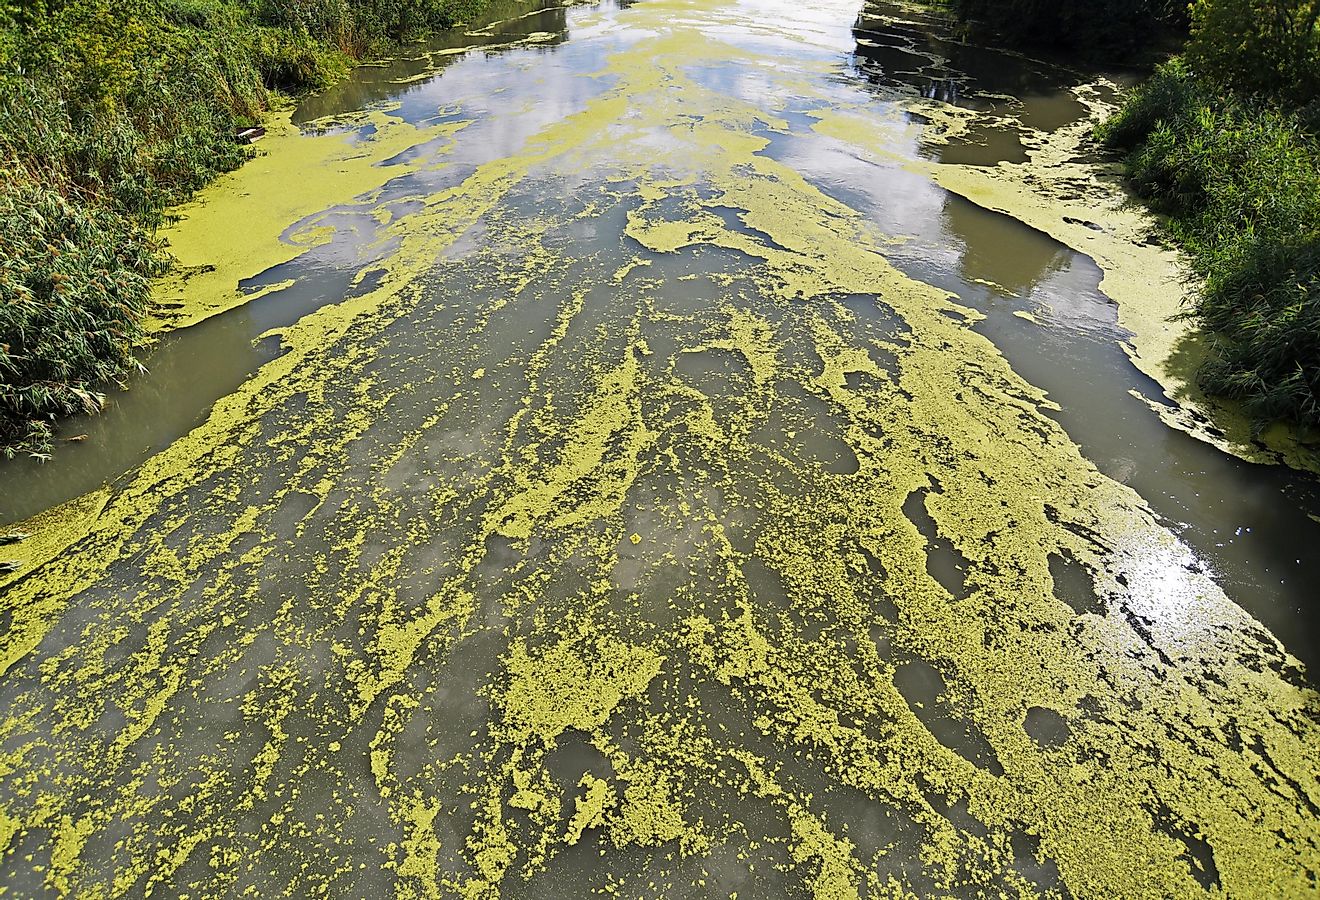 The algae bloom is another result of the pollution of the Ohio River.